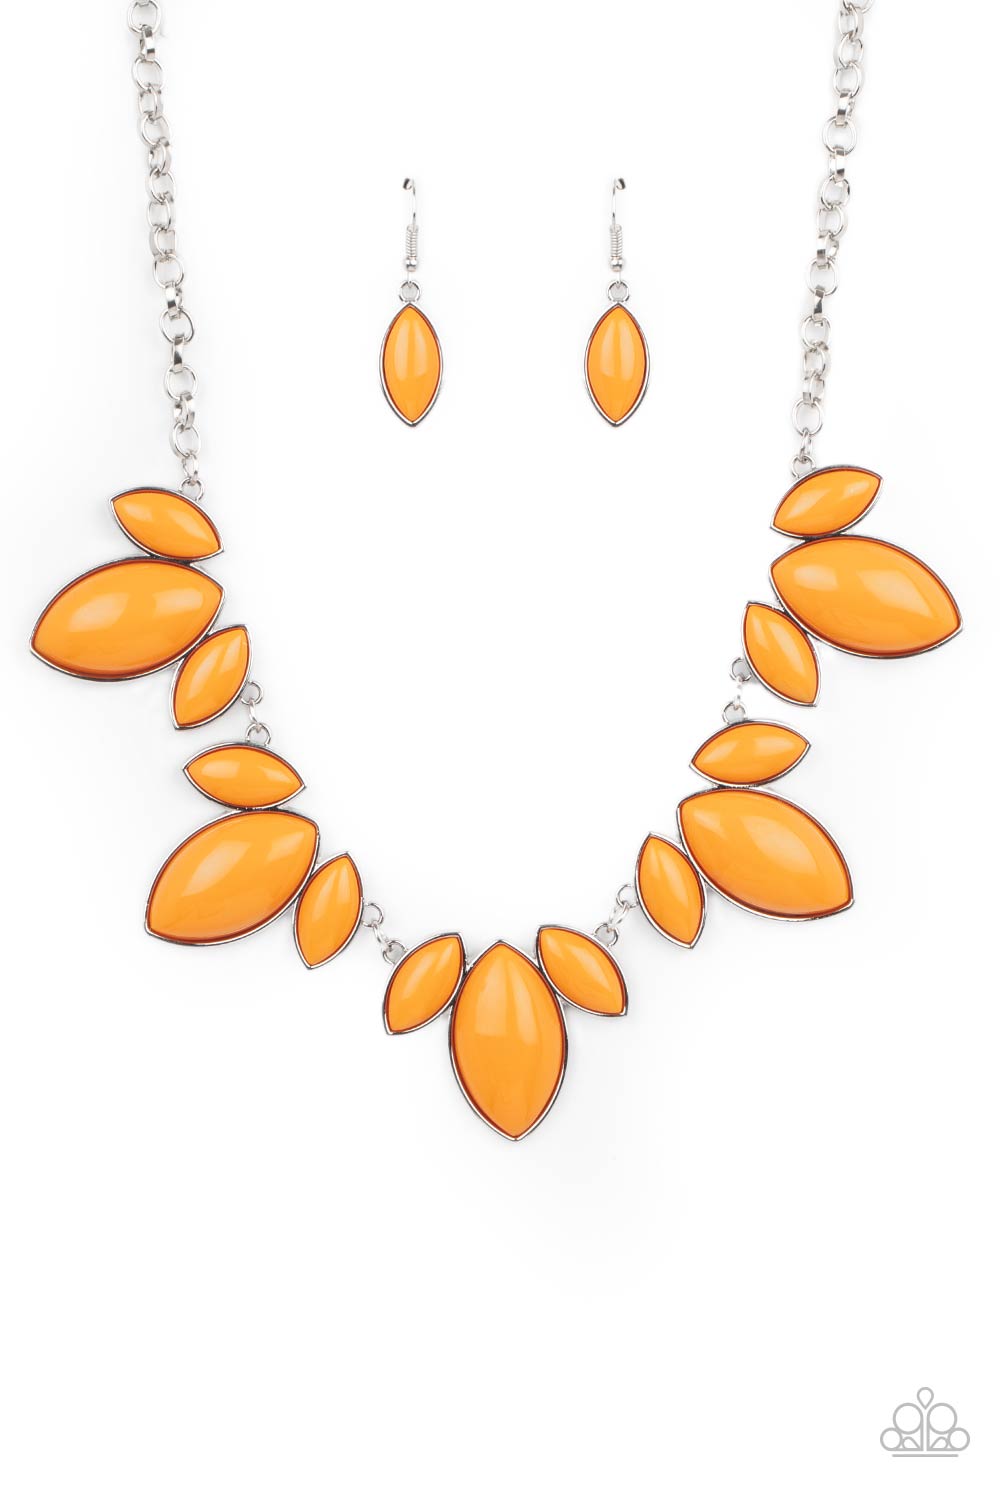 &lt;P&gt;Trios of Marigold marquise shaped beads connect into leafy frames below the collar, creating a vivacious centerpiece. Features an adjustable clasp closure. &lt;/p&gt;

&lt;P&gt;&lt;i&gt; Sold as one individual necklace.  Includes one pair of matching earrings.
&lt;/i&gt;&lt;/p&gt;

&lt;img src=\&quot;https://d9b54x484lq62.cloudfront.net/paparazzi/shopping/images/517_tag150x115_1.png\&quot; alt=\&quot;New Kit\&quot; align=\&quot;middle\&quot; height=\&quot;50\&quot; width=\&quot;50\&quot;/&gt;
